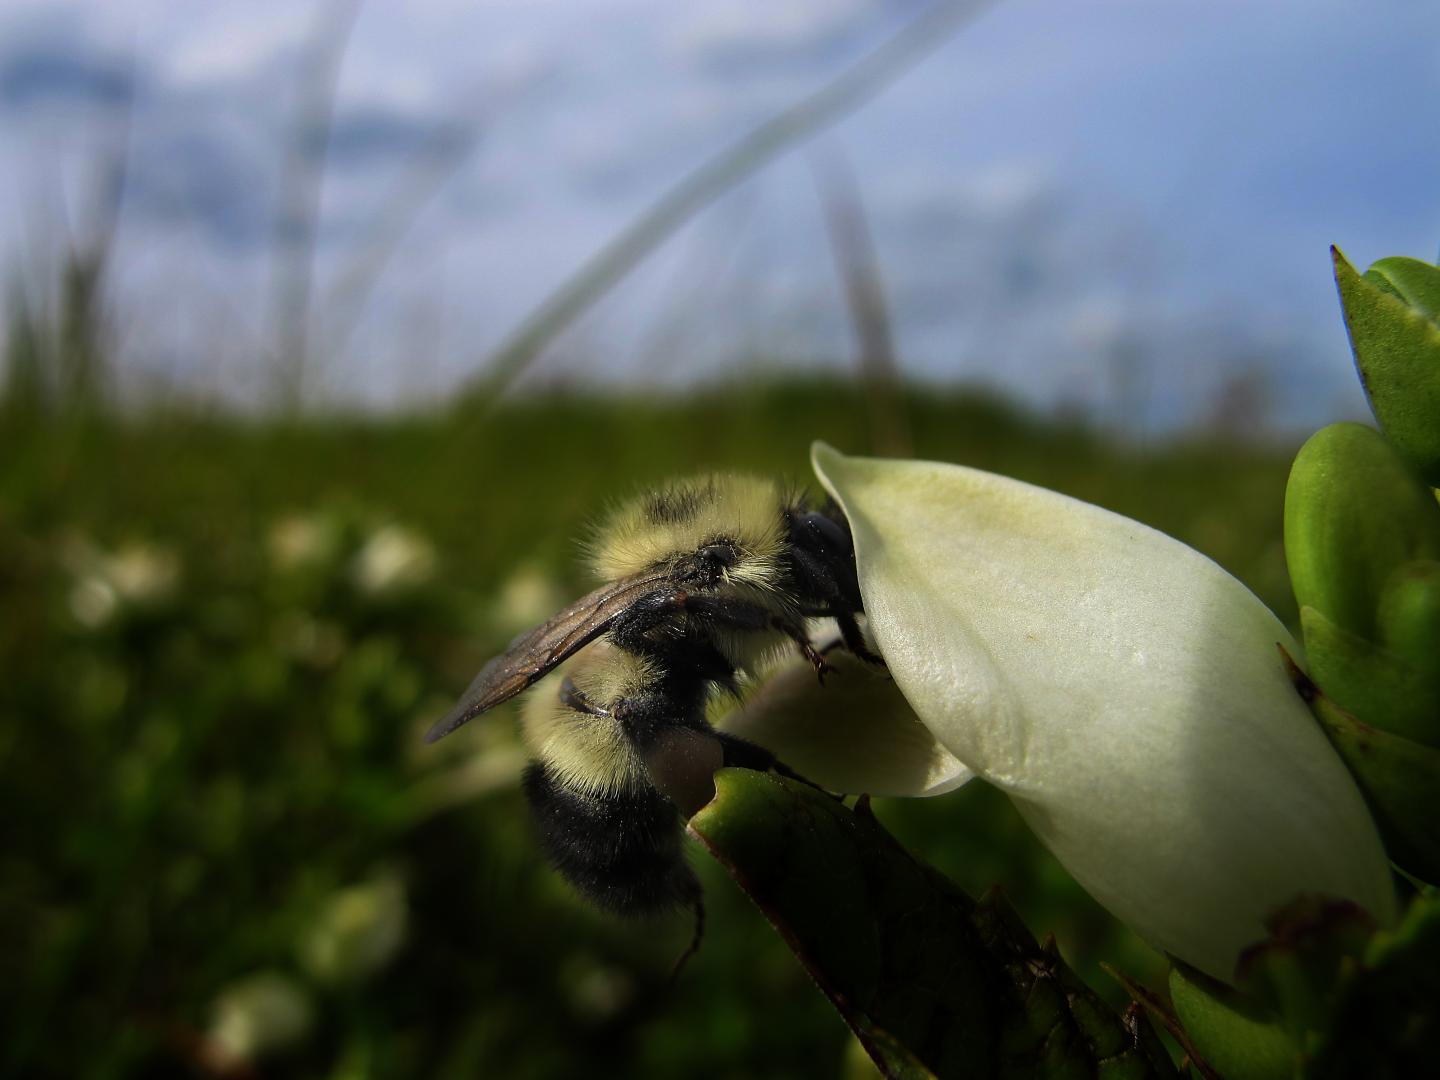 Bumble Bee Collecting Nectar Containing Iridoid Glycoside Secondary Metabolites